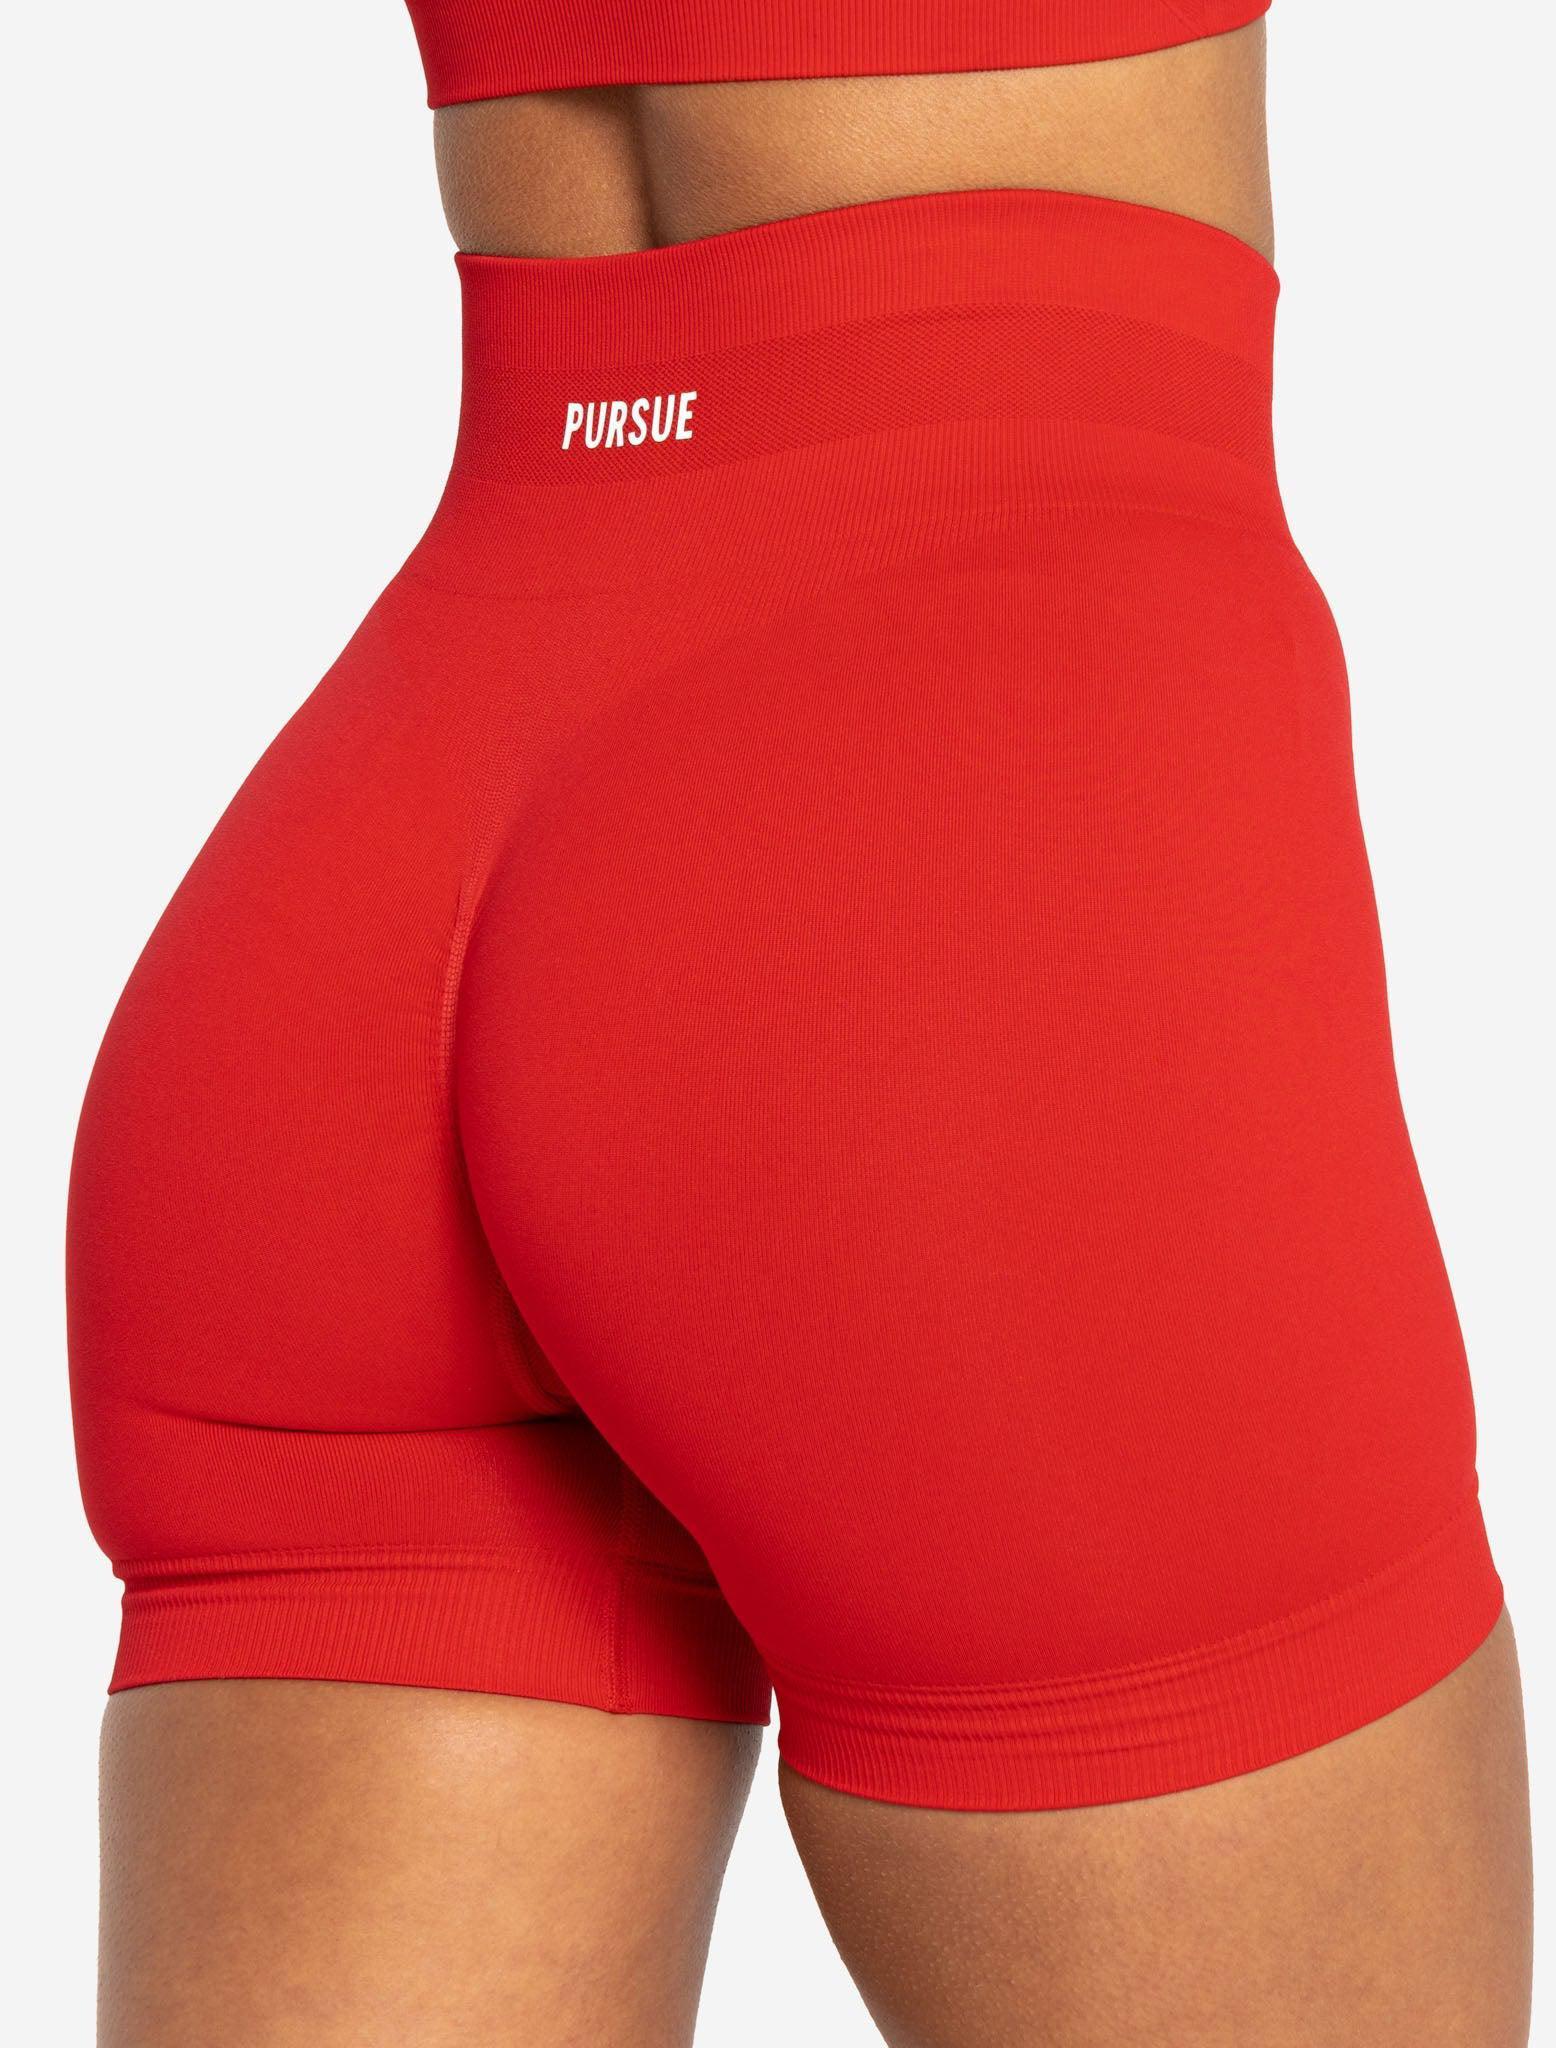 Scrunch Seamless Shorts / Candy Red Pursue Fitness 3